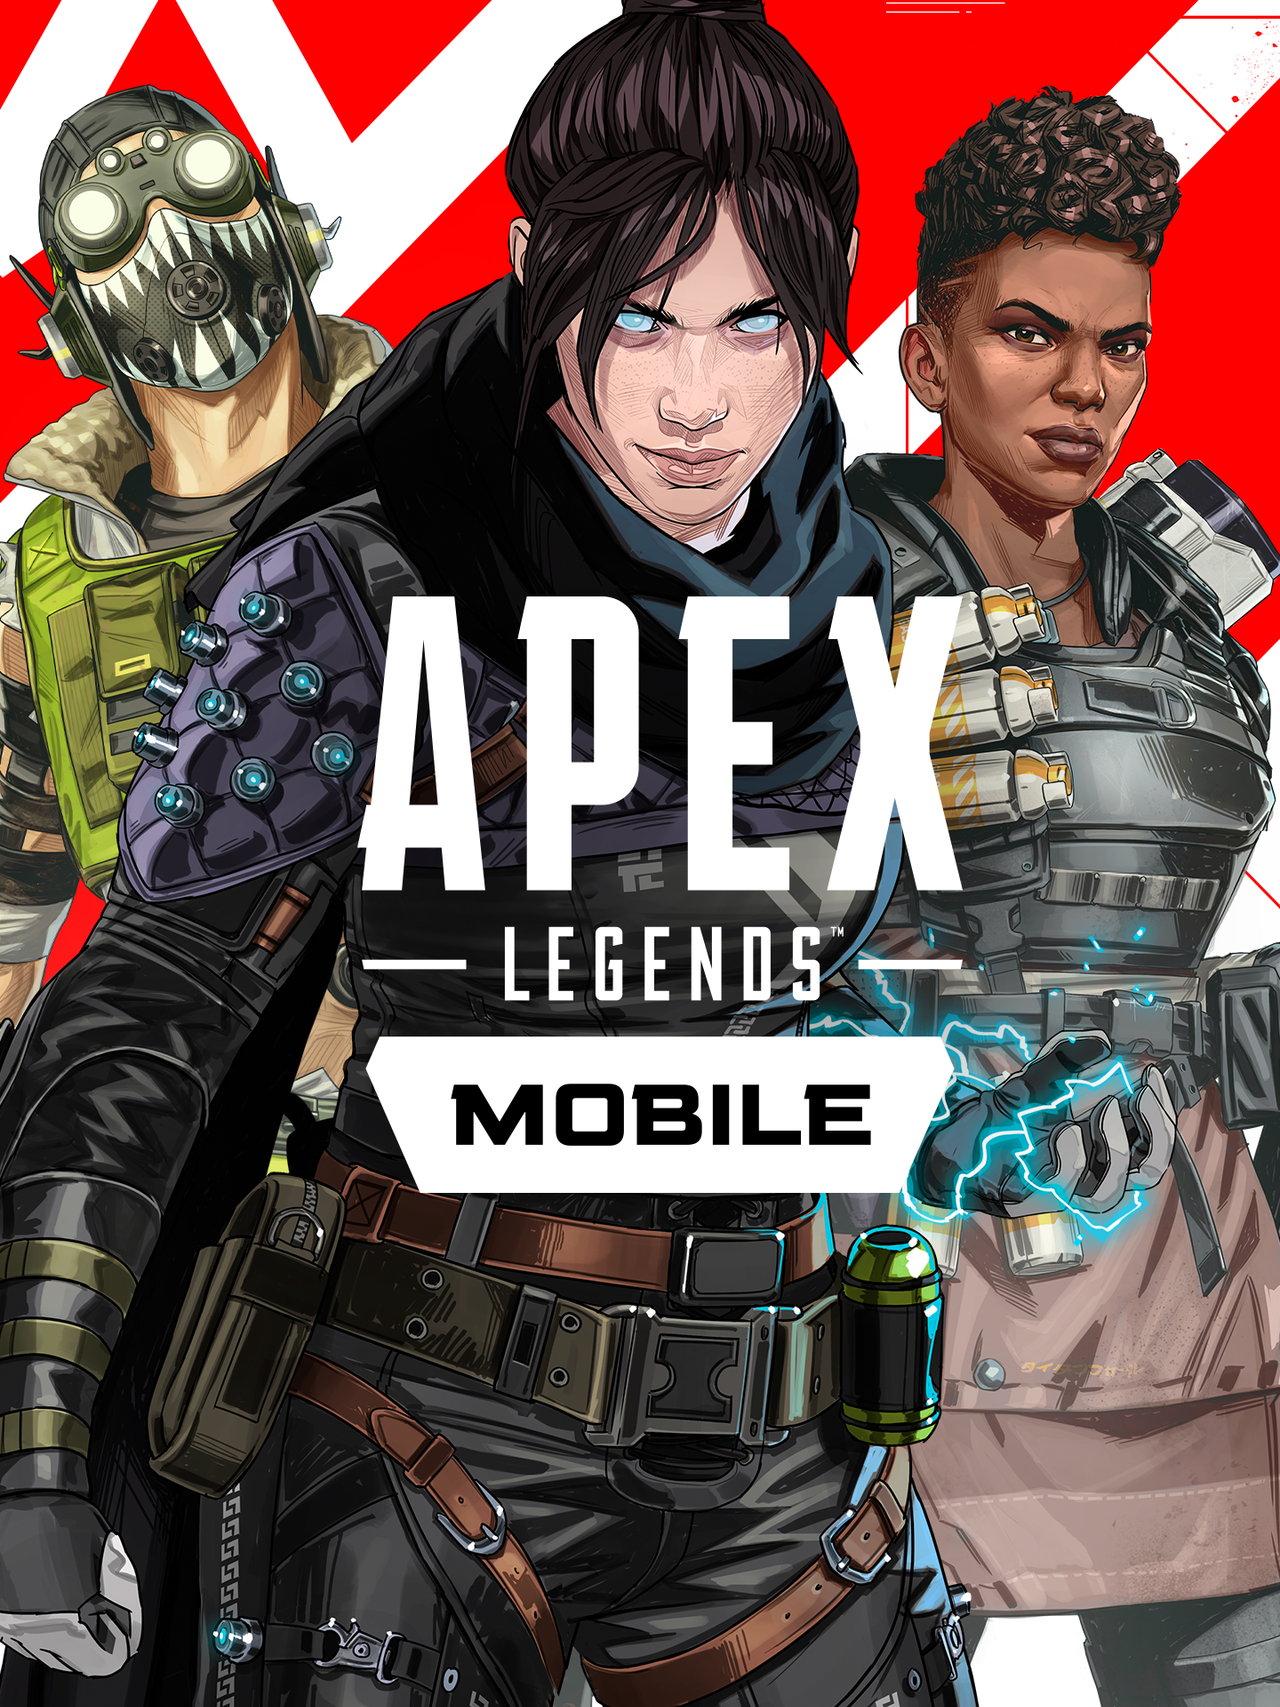 Google Play names Apex Legends Mobile the best game of 2022